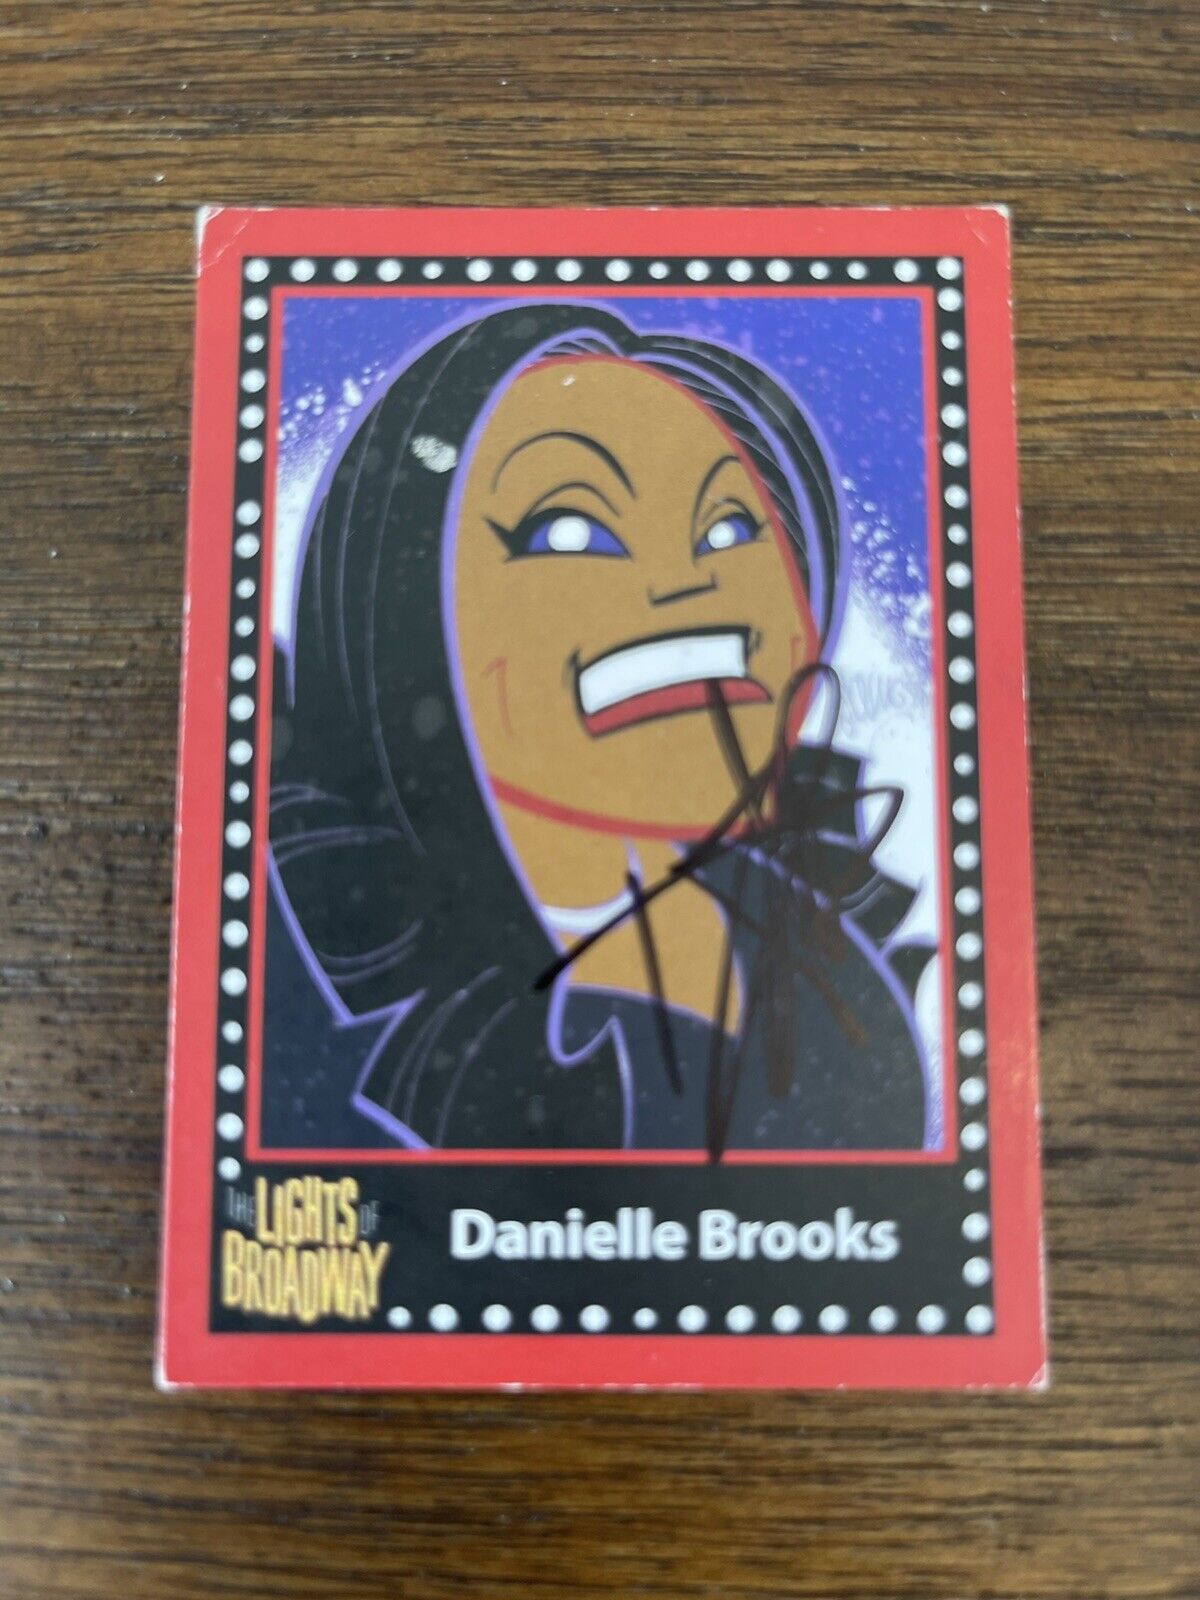 Lights of Broadway Danielle Brooks -  SIGNED - Autumn 2016 Trading Card